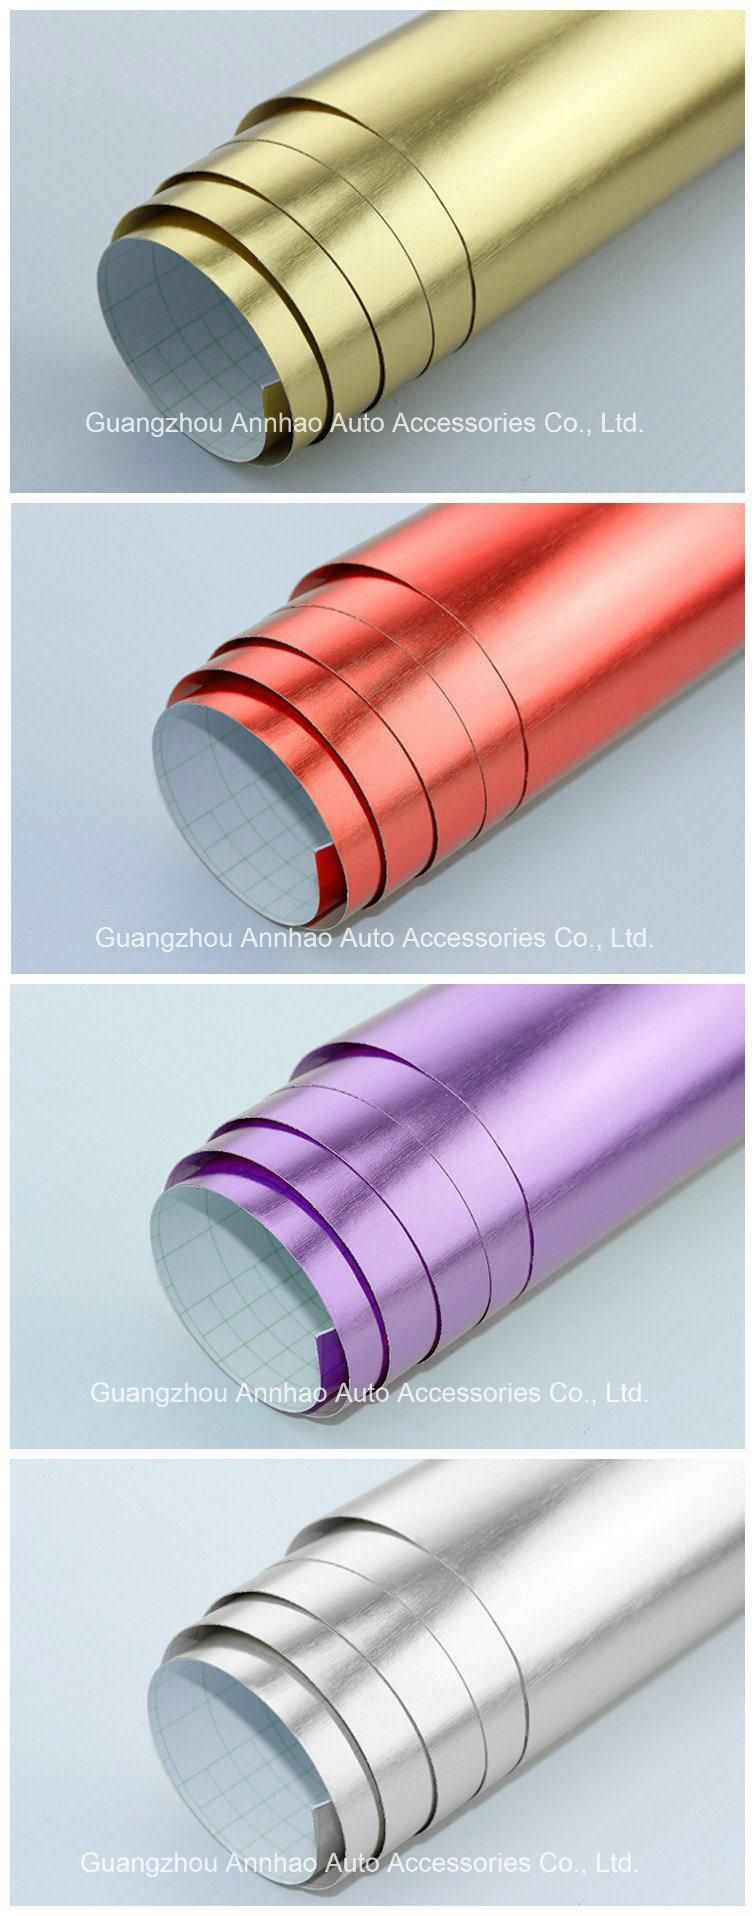 Ondis Mirror Chrome Brushed Car Sticker Wrapping Roll Vinyl